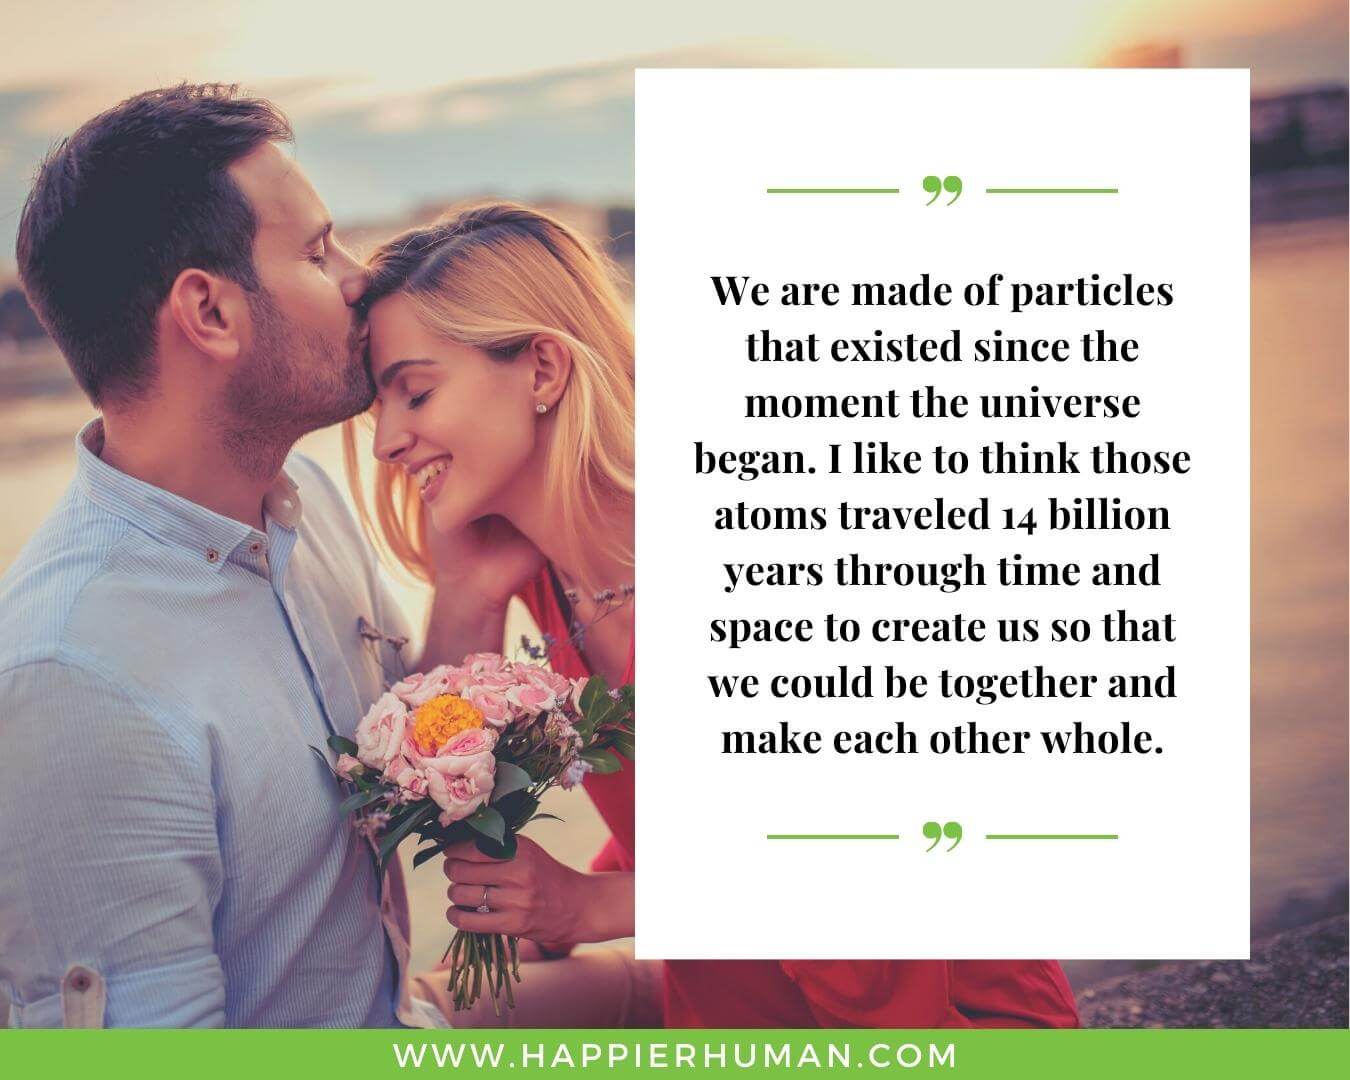 Unconditional Love Quotes for Her - “We are made of particles that existed since the moment the universe began. I like to think those atoms traveled 14 billion years through time and space to create us so that we could be together and make each other whole.”